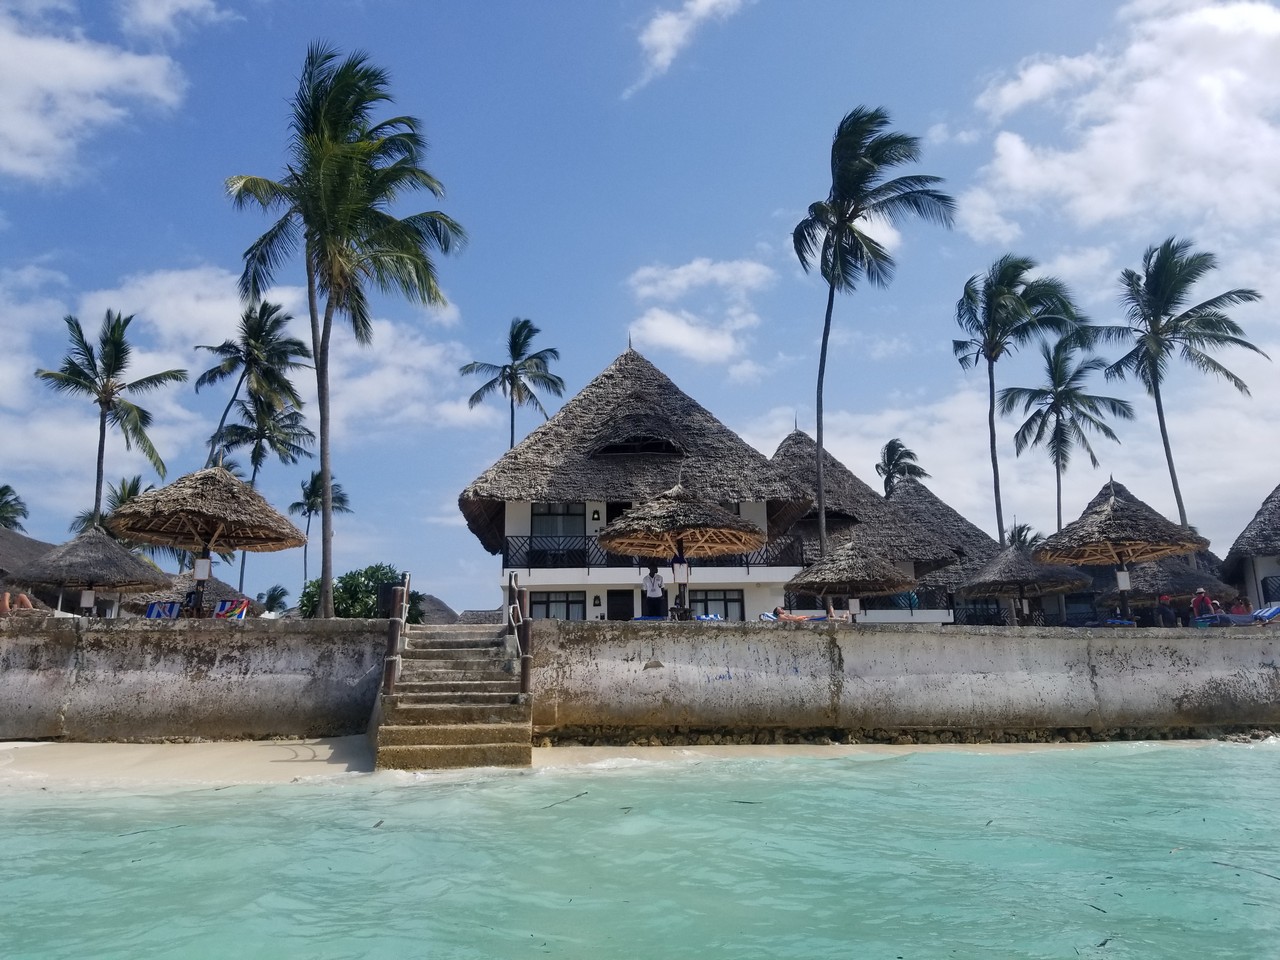 a building with thatched roofs and palm trees on a beach